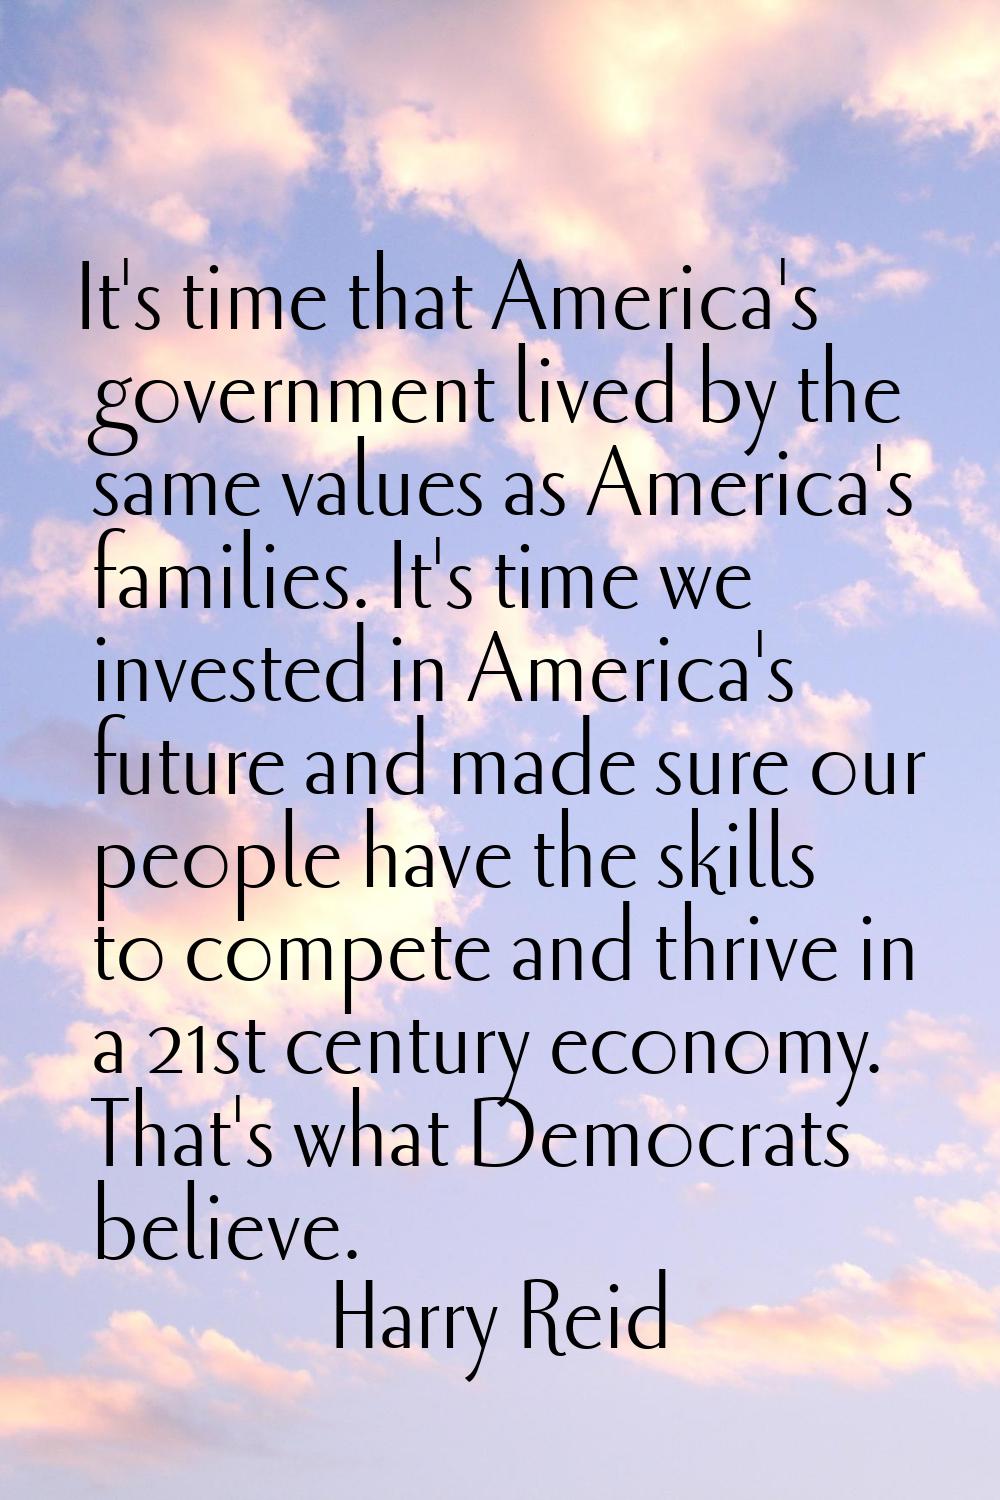 It's time that America's government lived by the same values as America's families. It's time we in